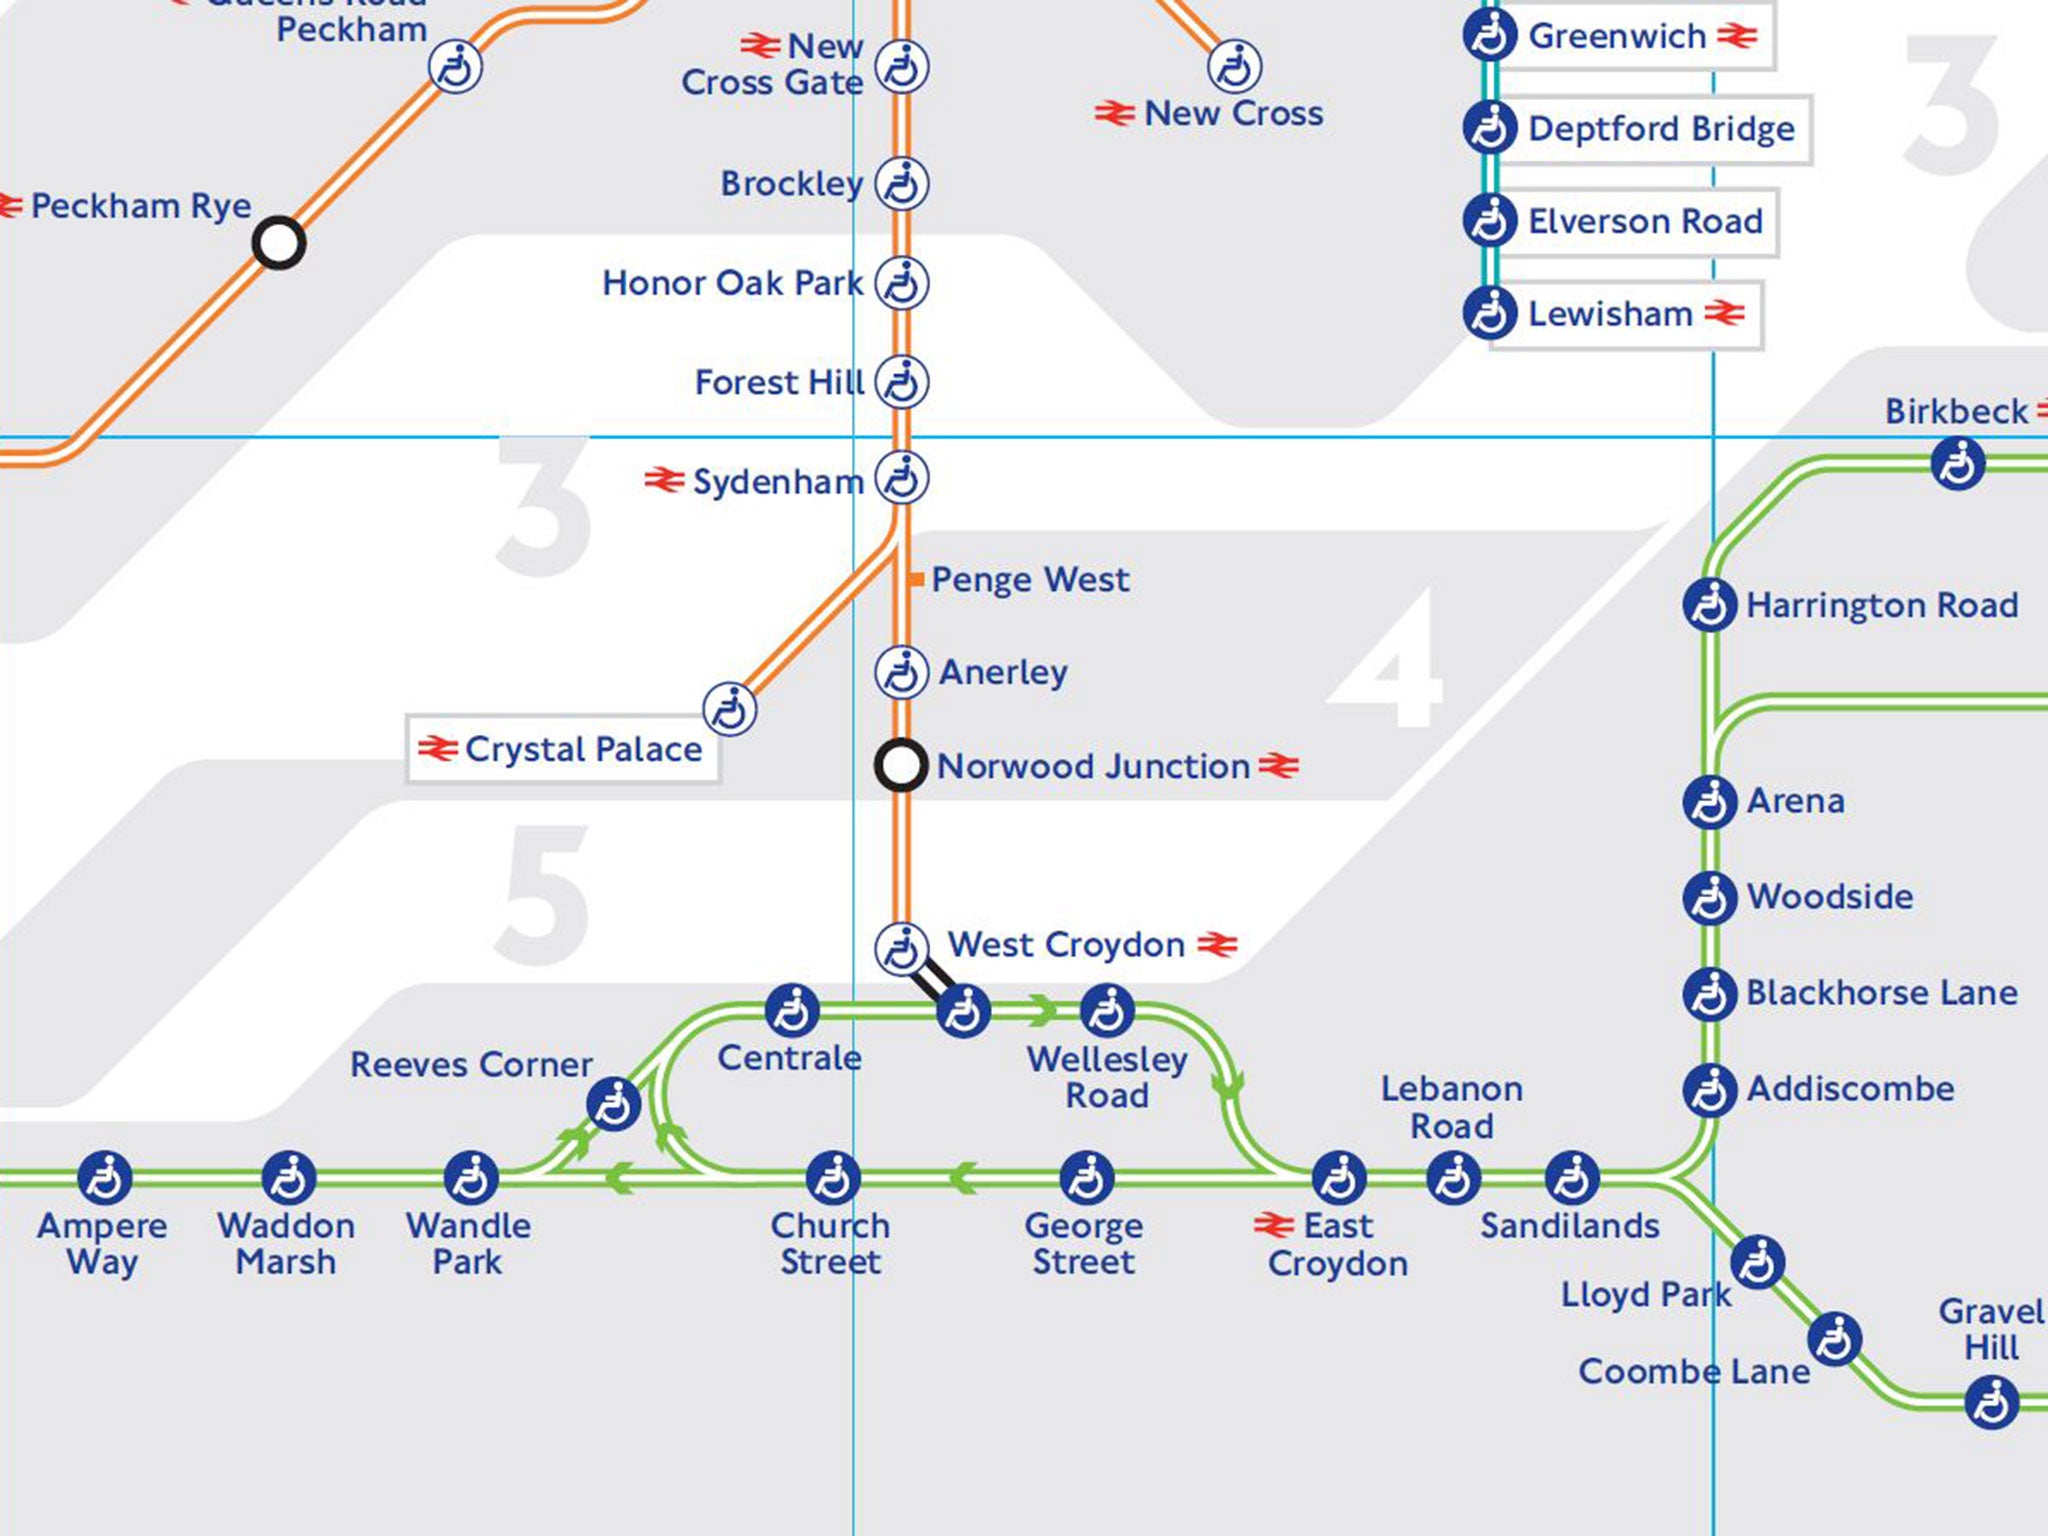 The Transport for London (TfL) map will include London's tram services for the first time from June 2016